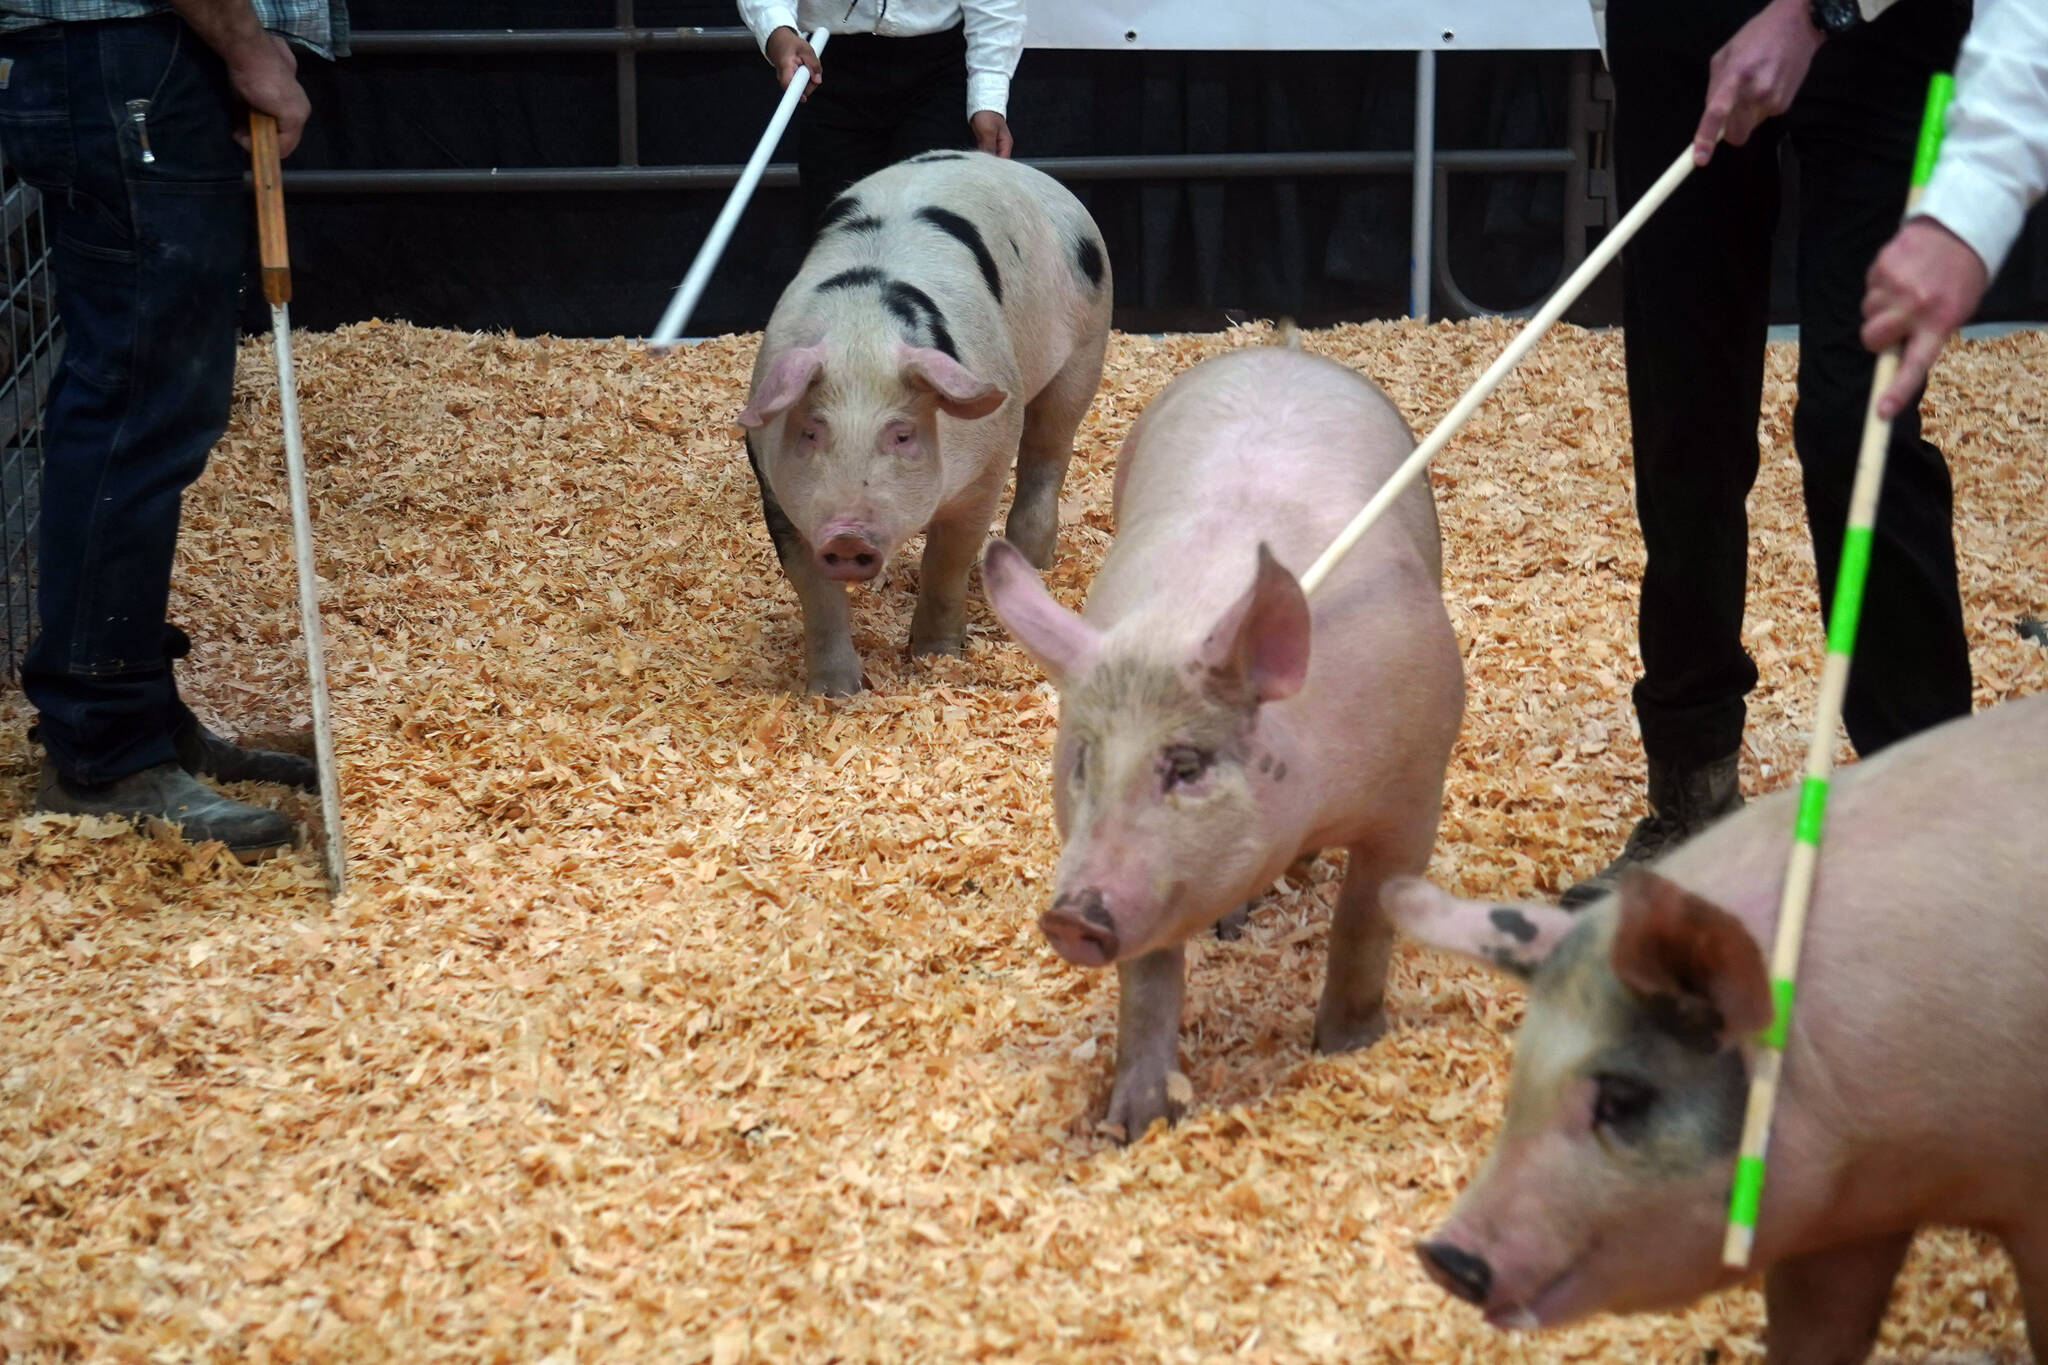 Pigs mill about at the Kenai Peninsula District 4-H Agriculture Expo on Friday, Aug. 4, 2023, at the Soldotna Regional Sports Complex in Soldotna, Alaska. (Jake Dye/Peninsula Clarion)